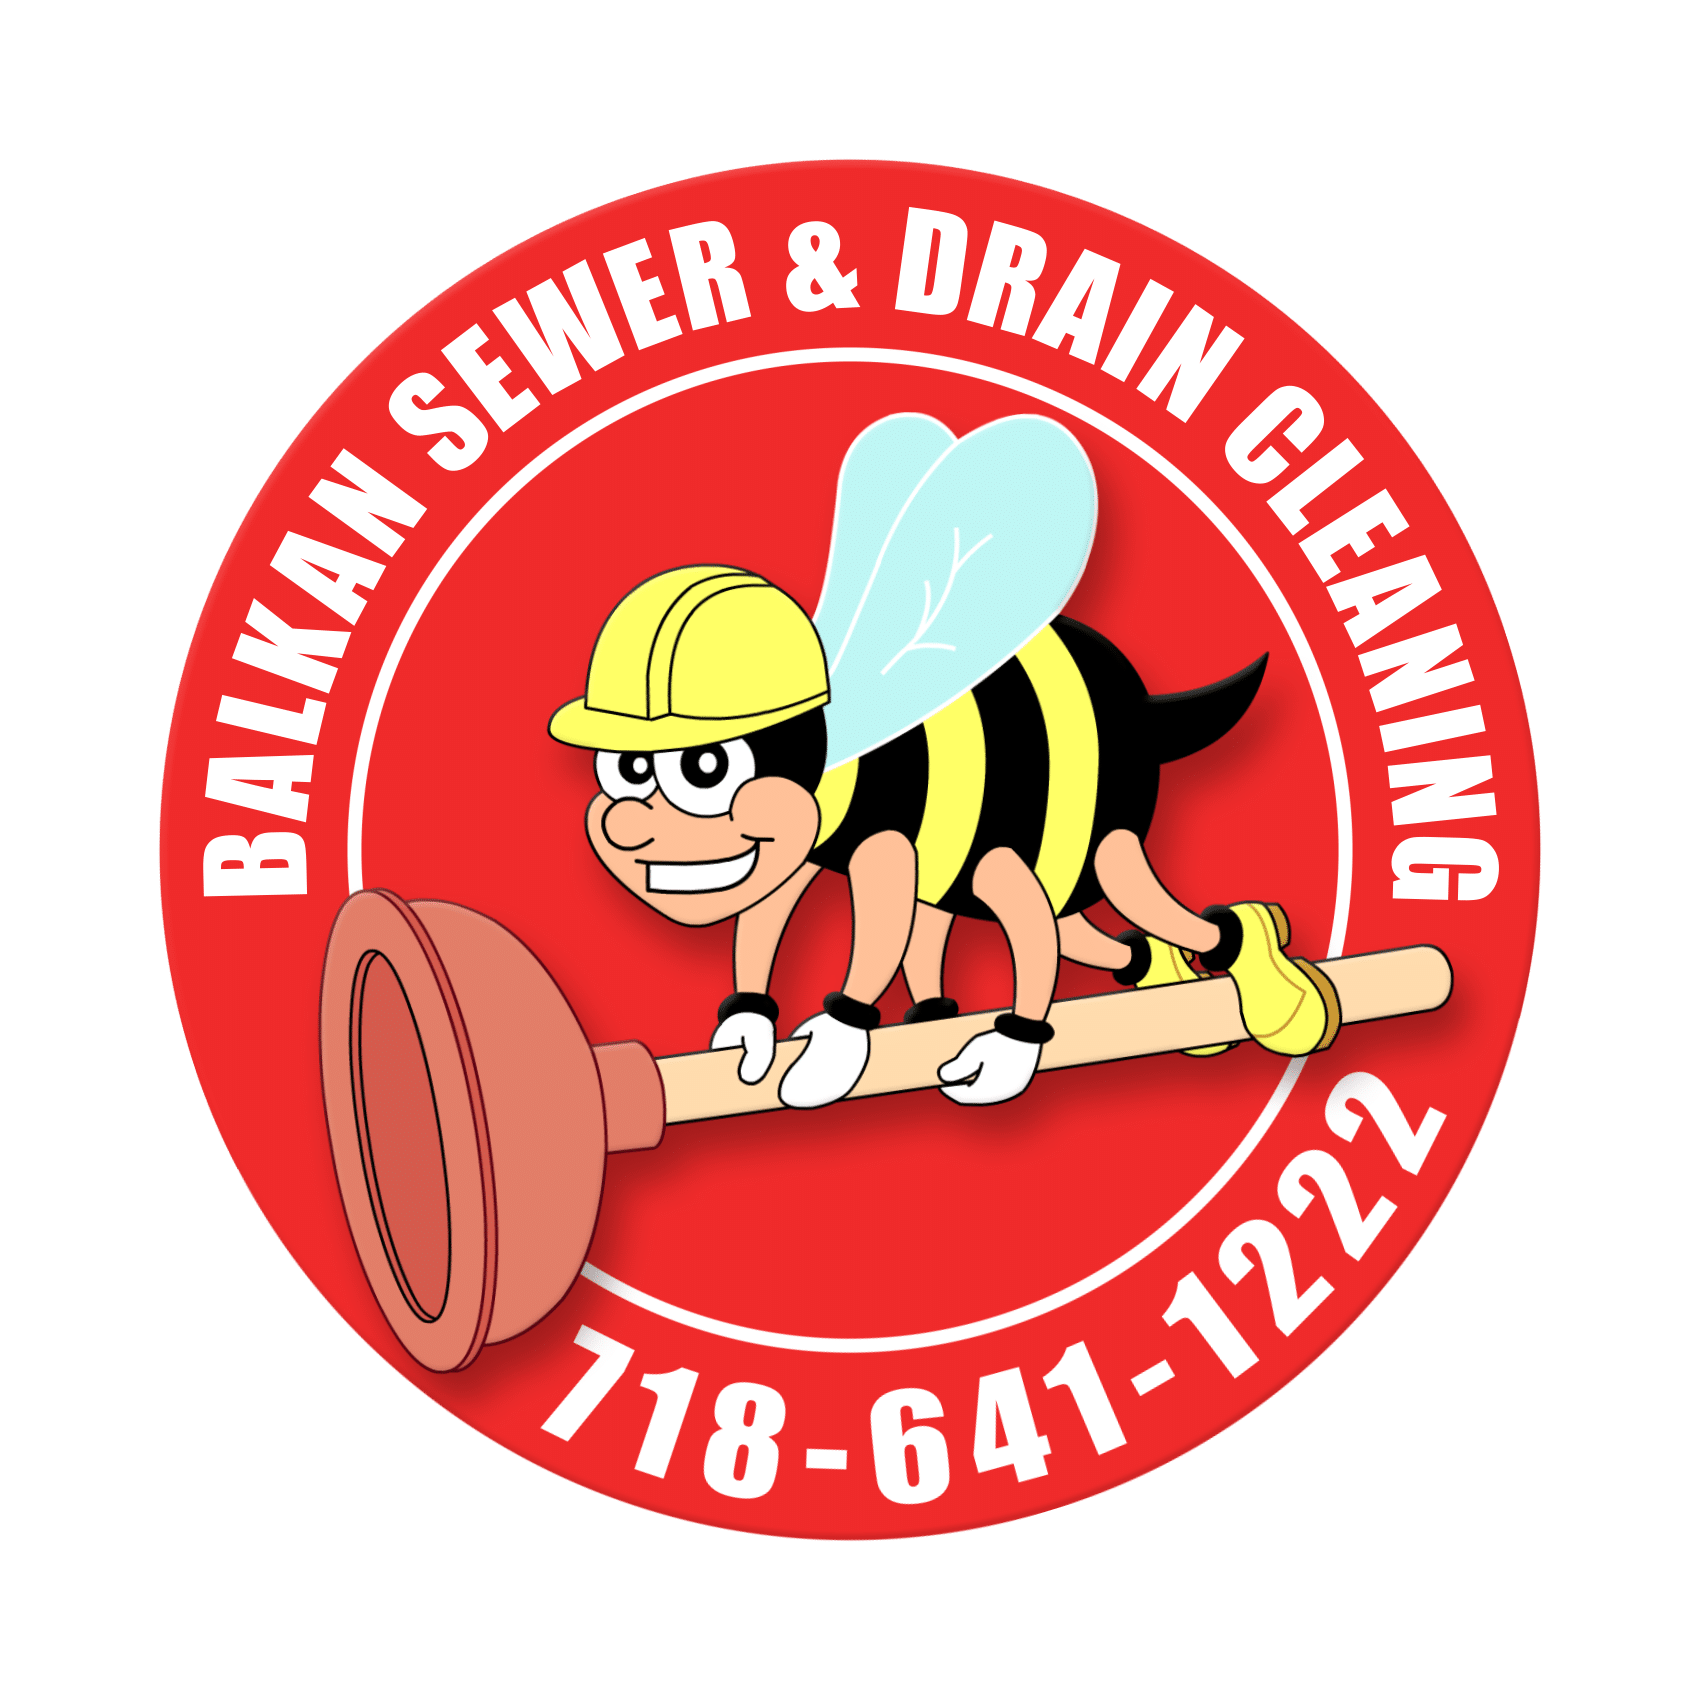 forest hills drain cleaner